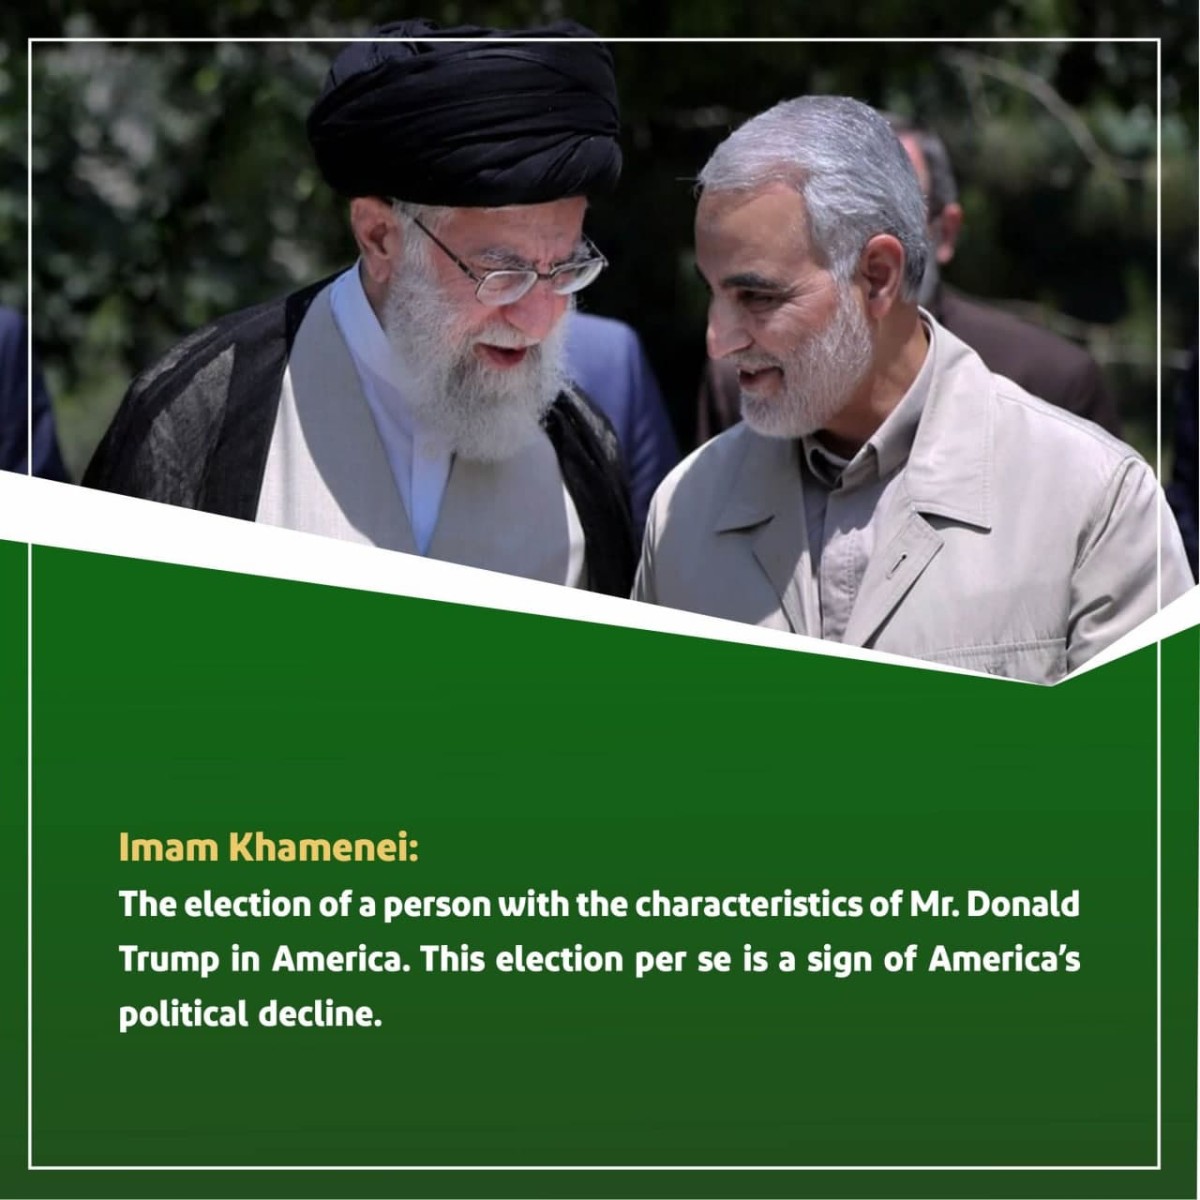  Imam Khamenei: The election of a person with the characteristics of Mr. Donald Trump in America.